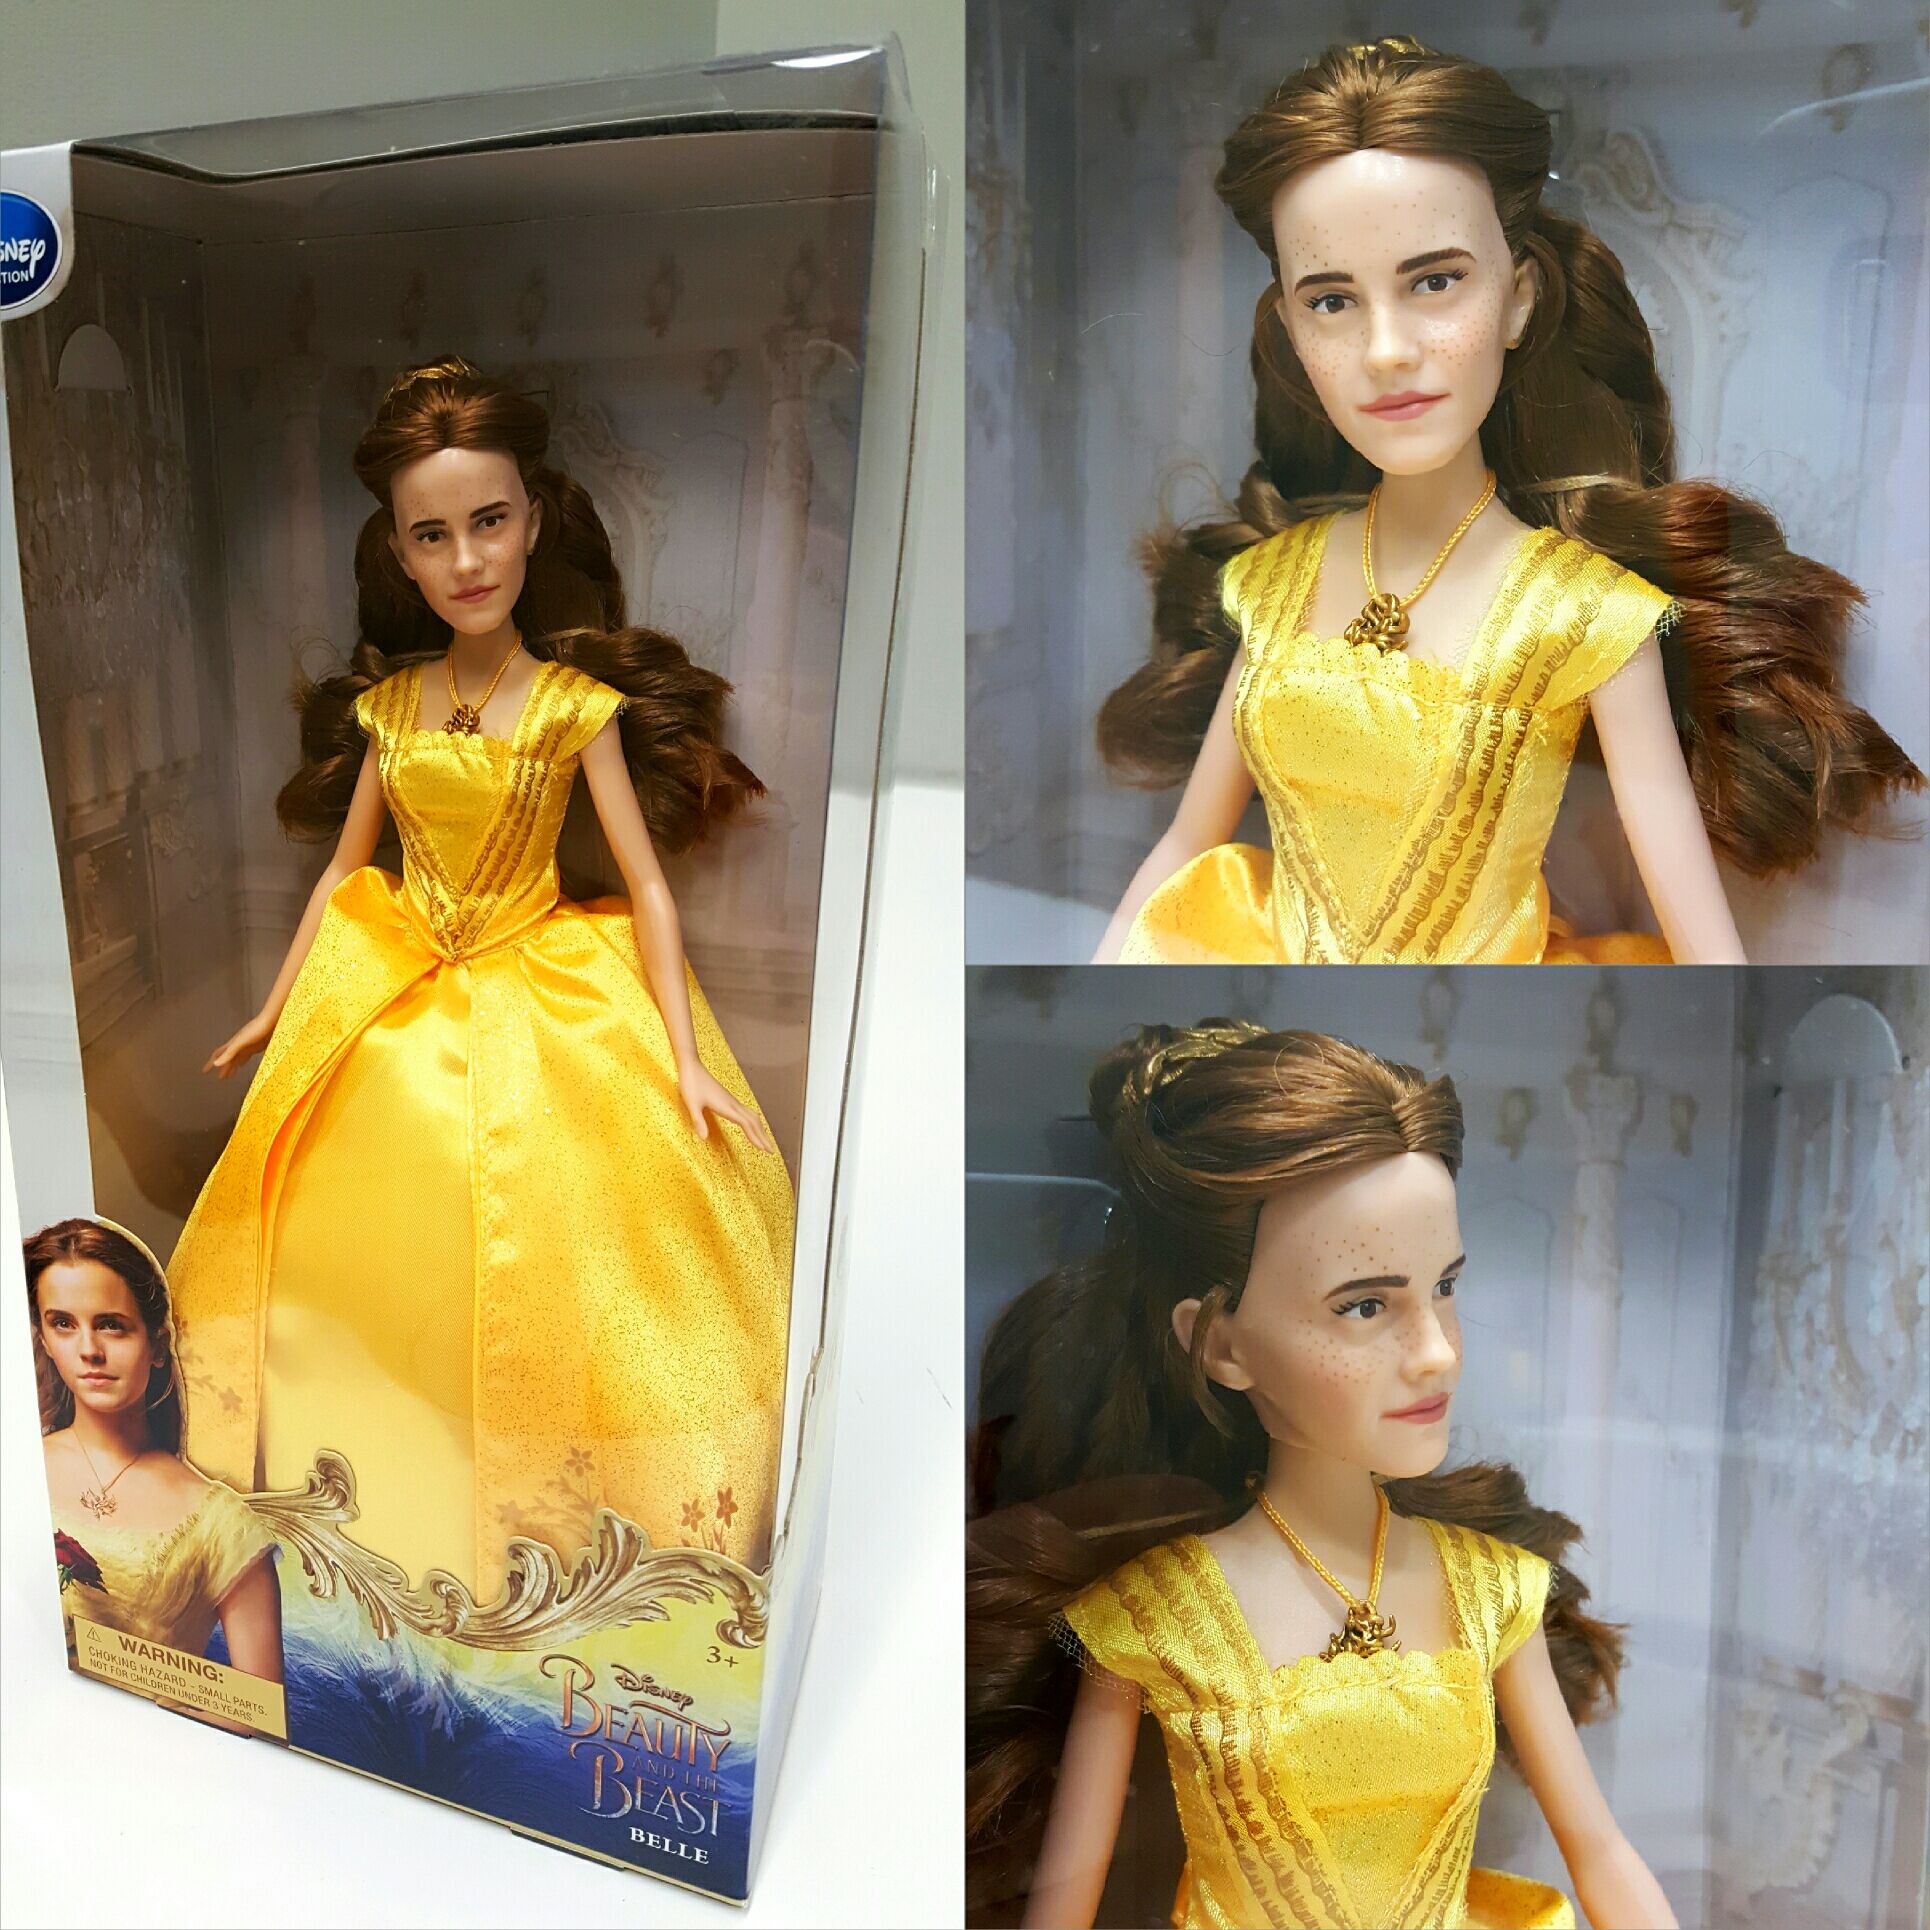 beast doll from beauty and the beast